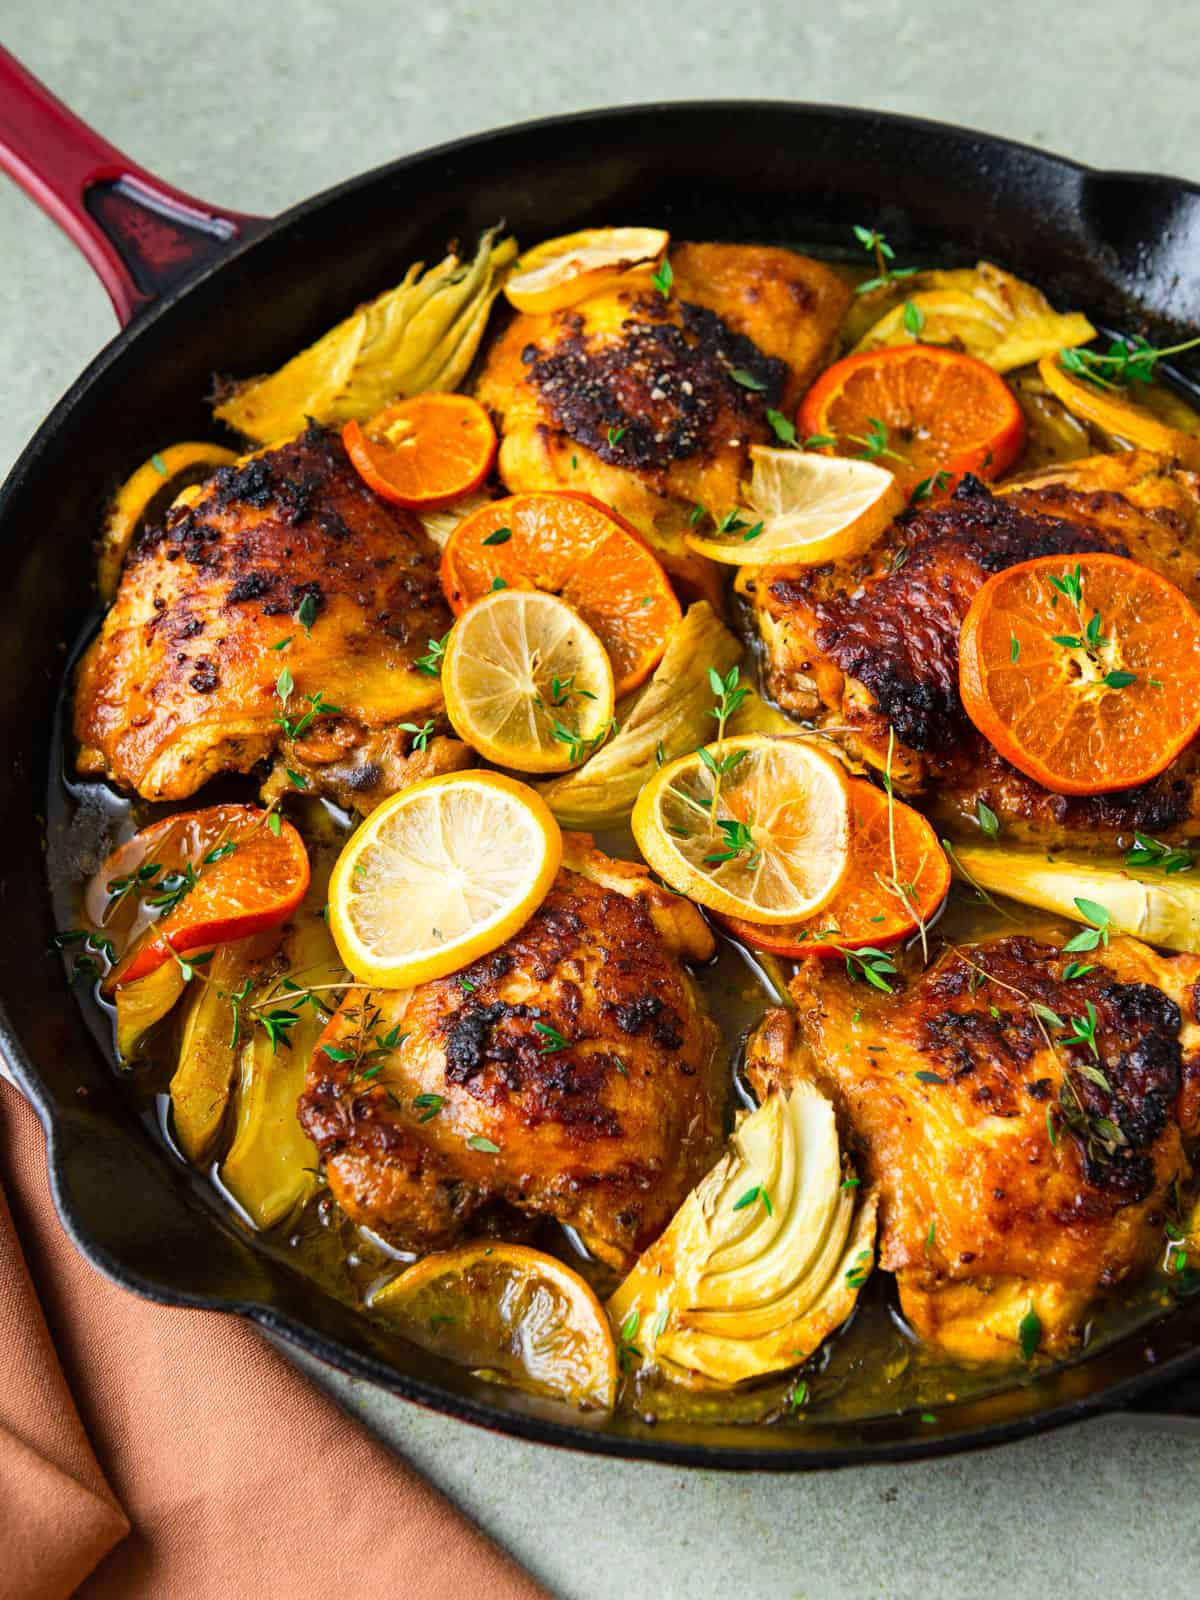 Citrus chicken with fennel and fresh thyme.